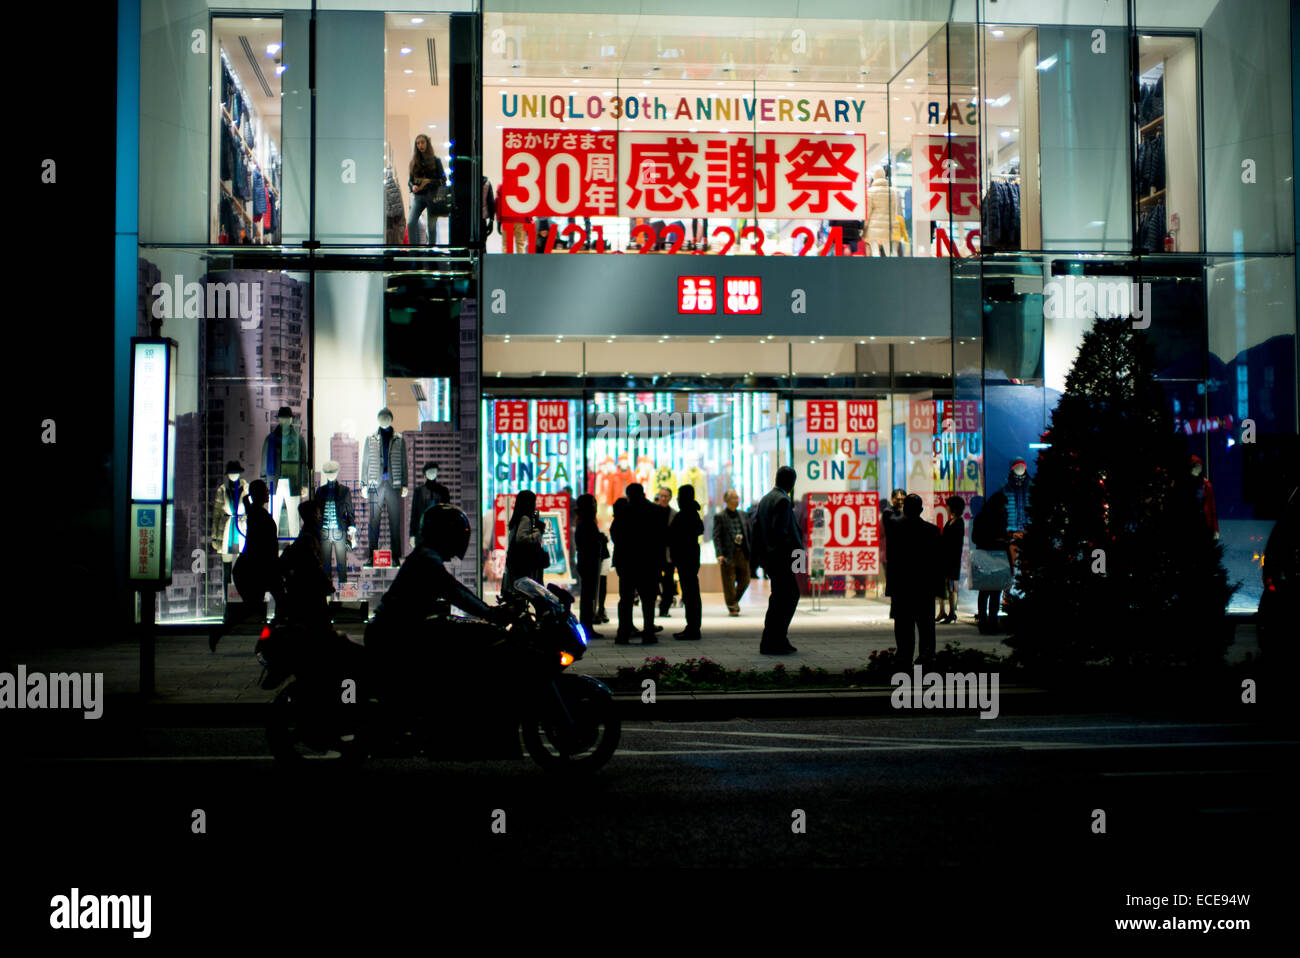 Uniqlo flagship store in Ginza Tokyo is enormous